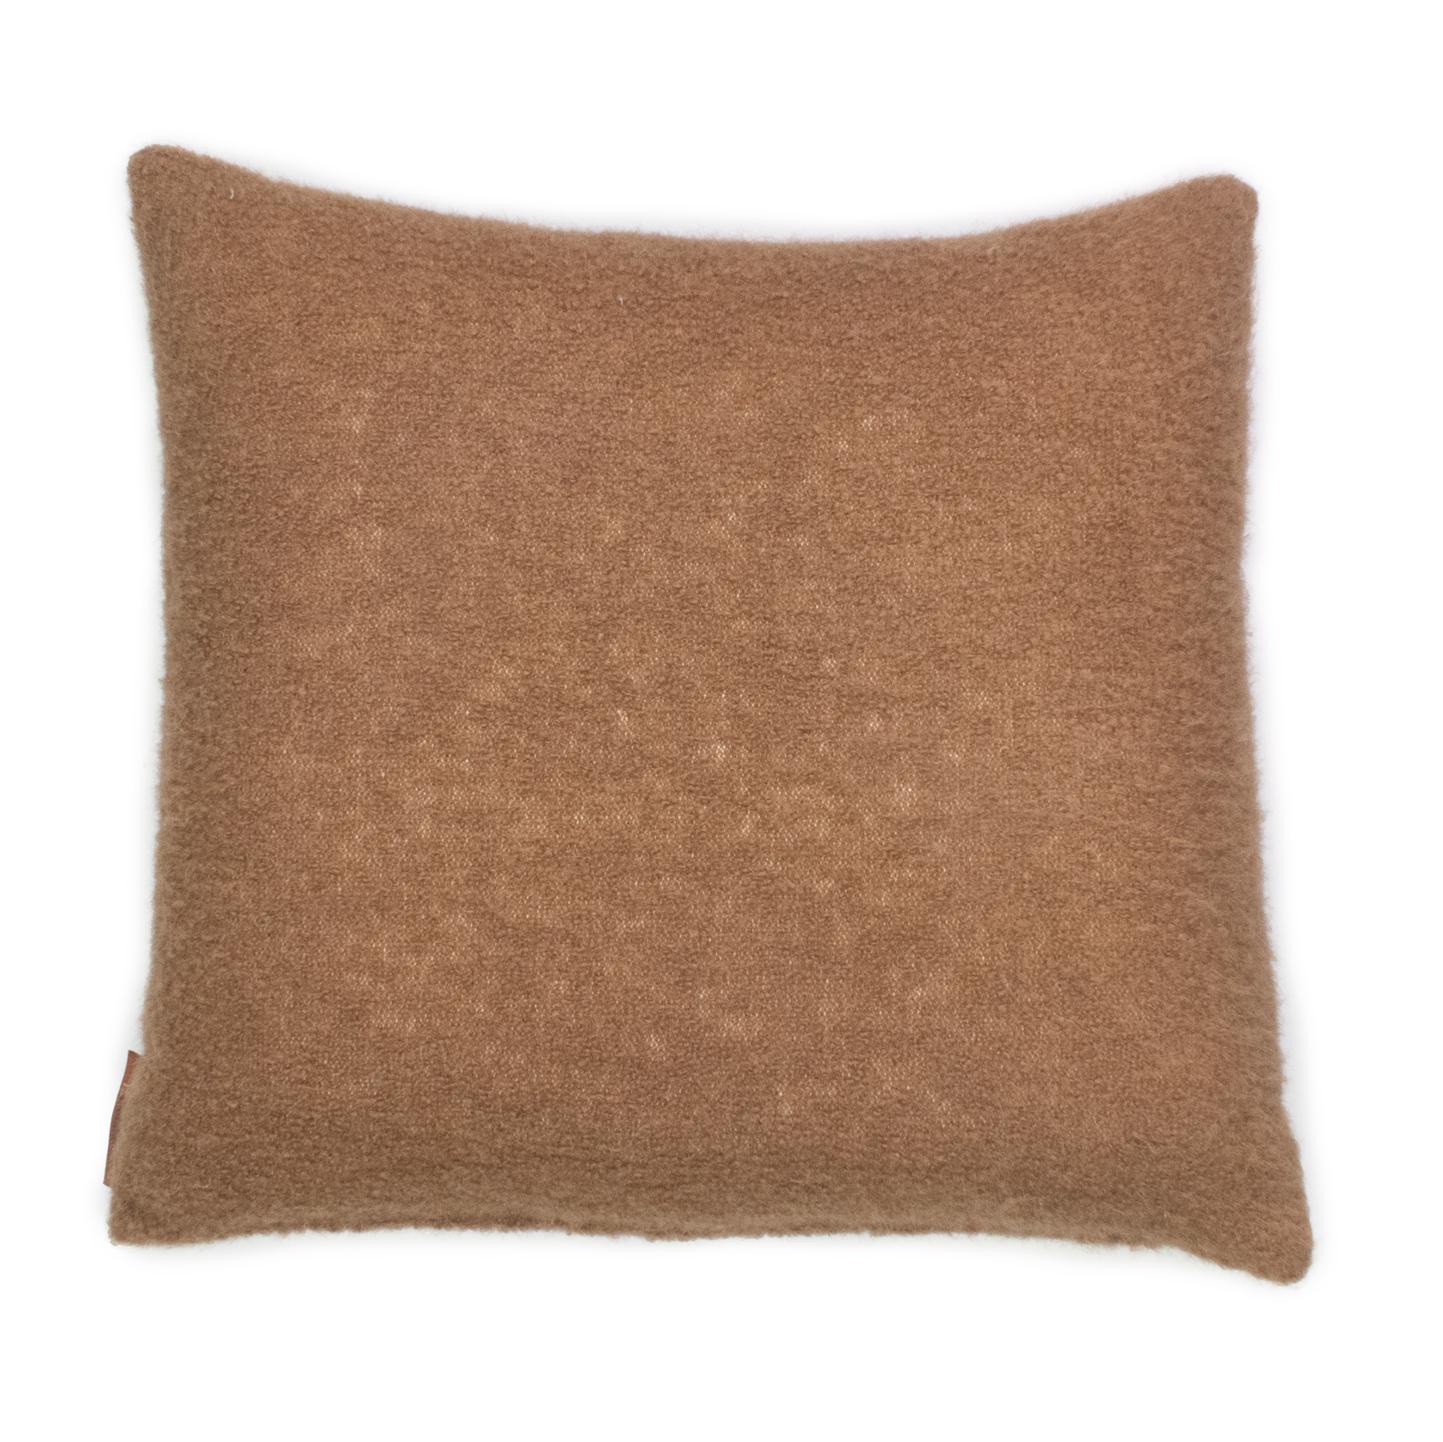 Modern Cushion / Pillow Chérie Brown Baby Alpaca Wool by Evolution21 For Sale